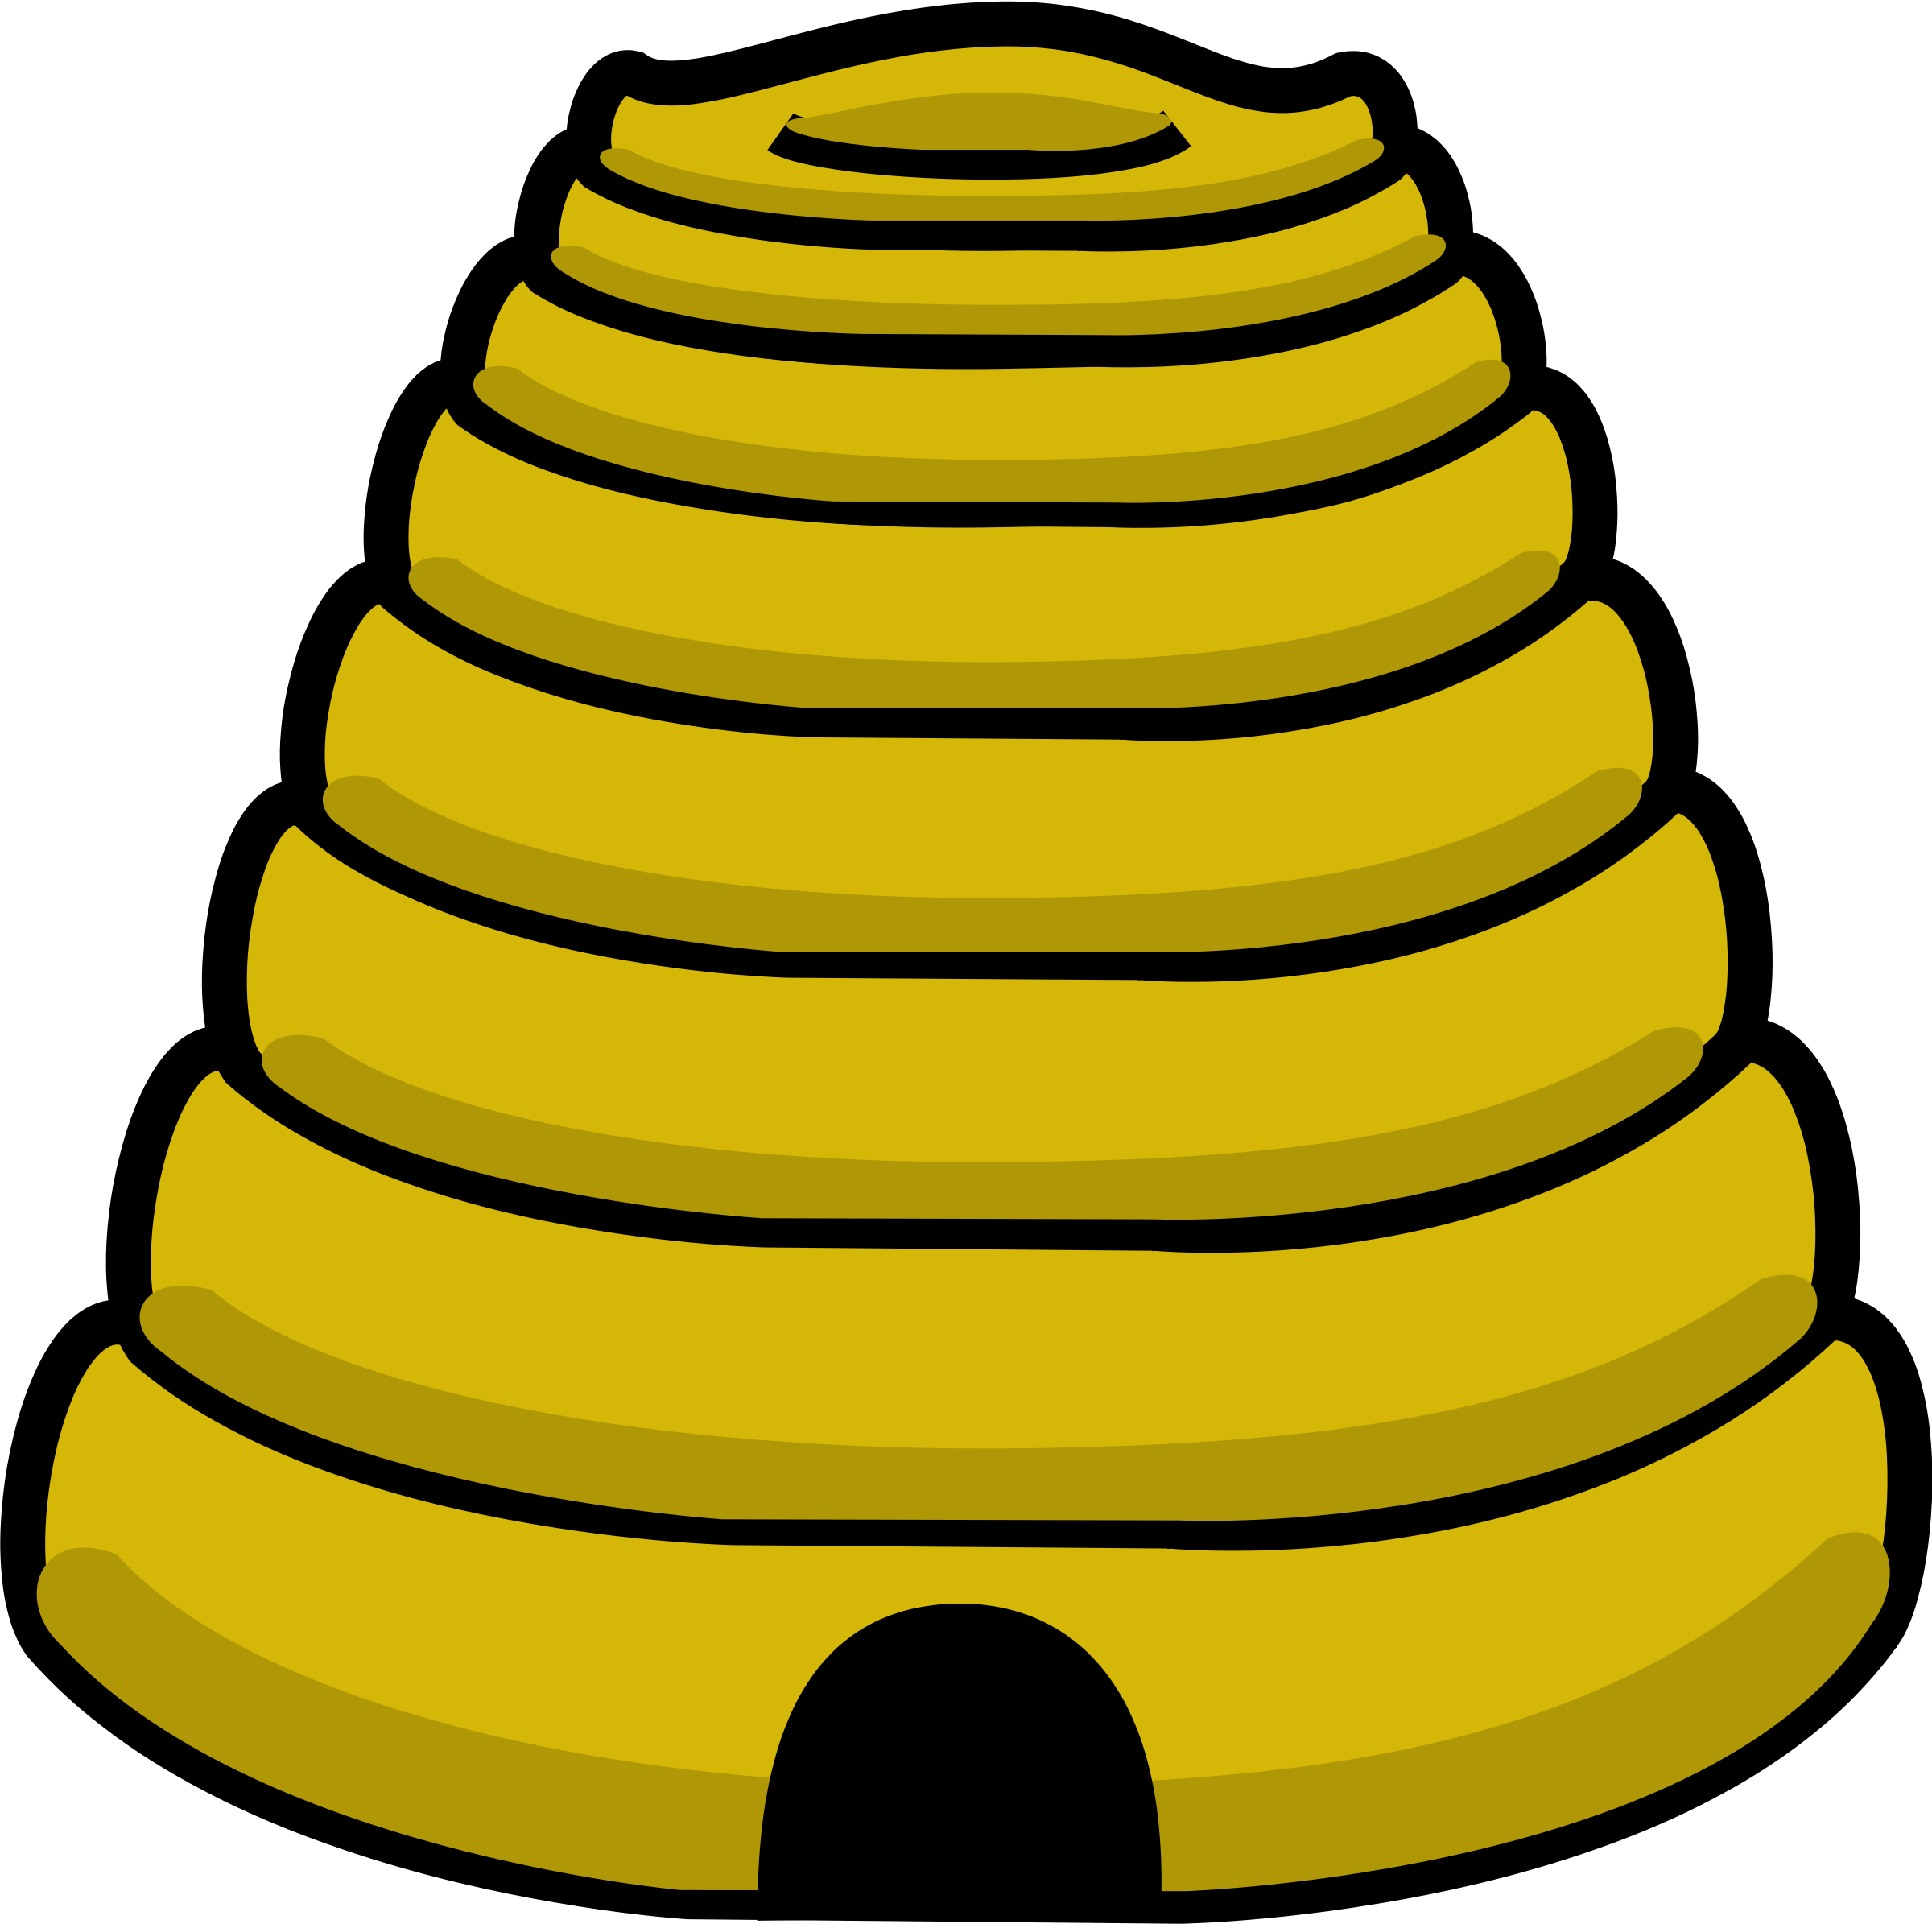 Picture Of Bee Hive - Clipart library